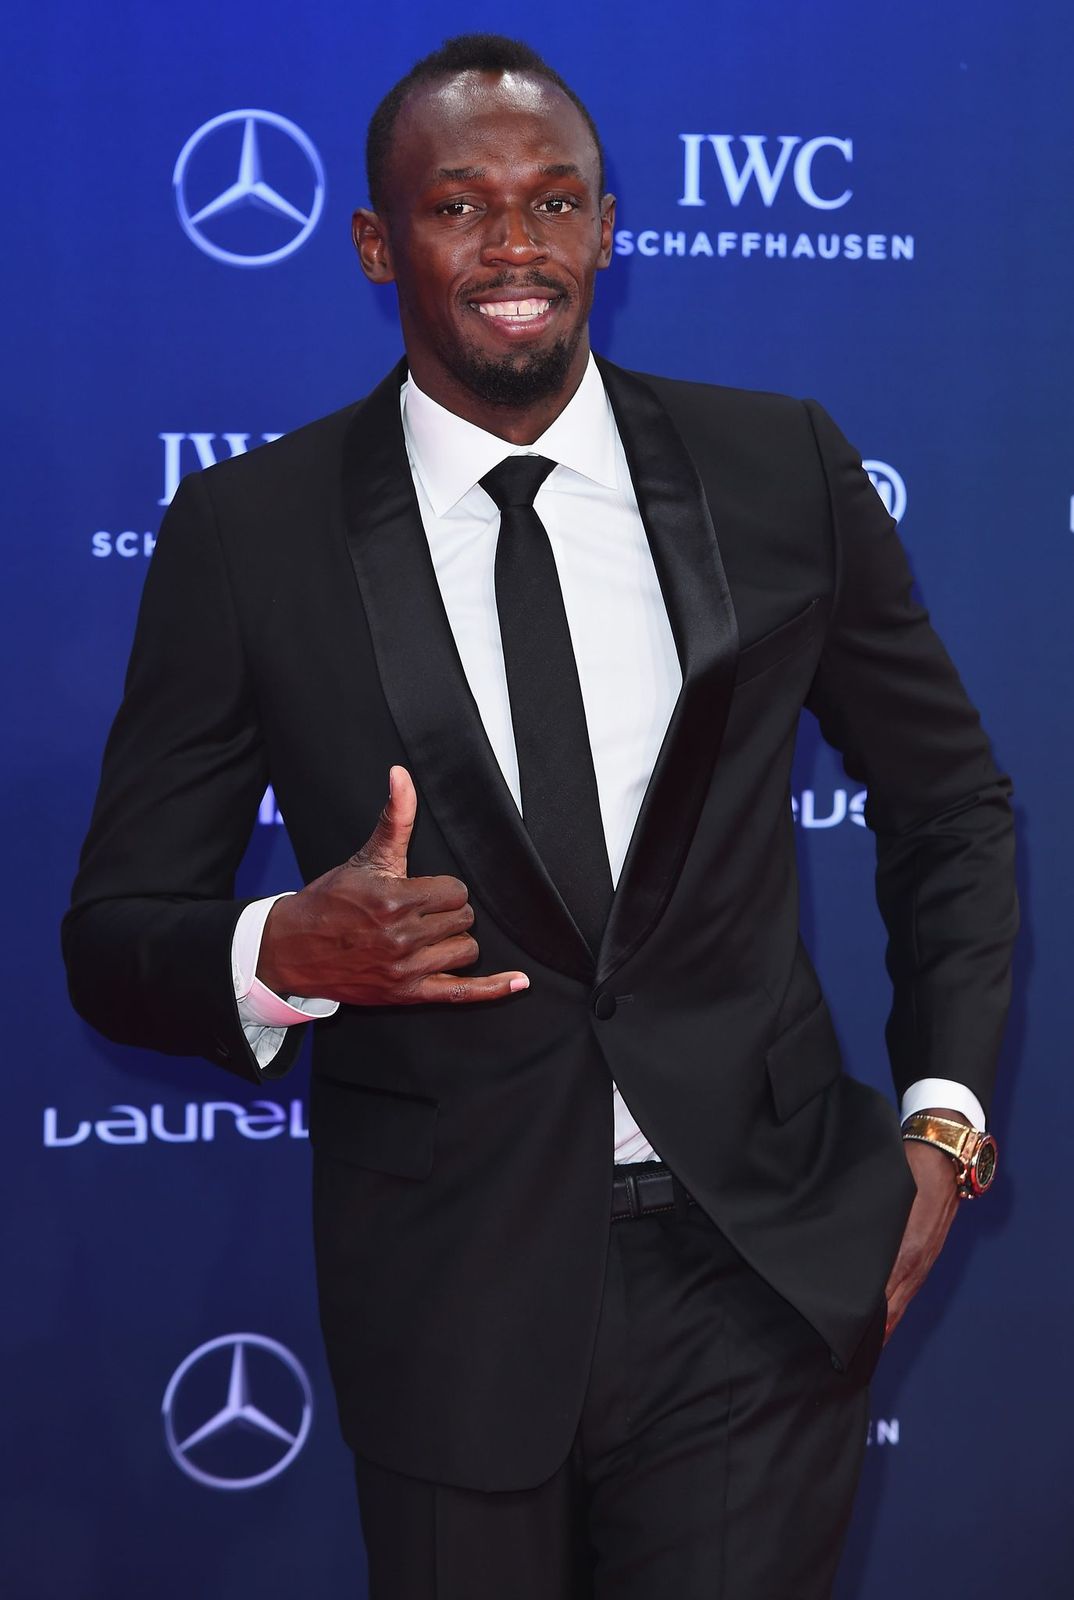 Usain Bolt at the Laureus World Sports Awards on February 14, 2017, in Monaco | Photo: Eamonn M. McCormack/Getty Images